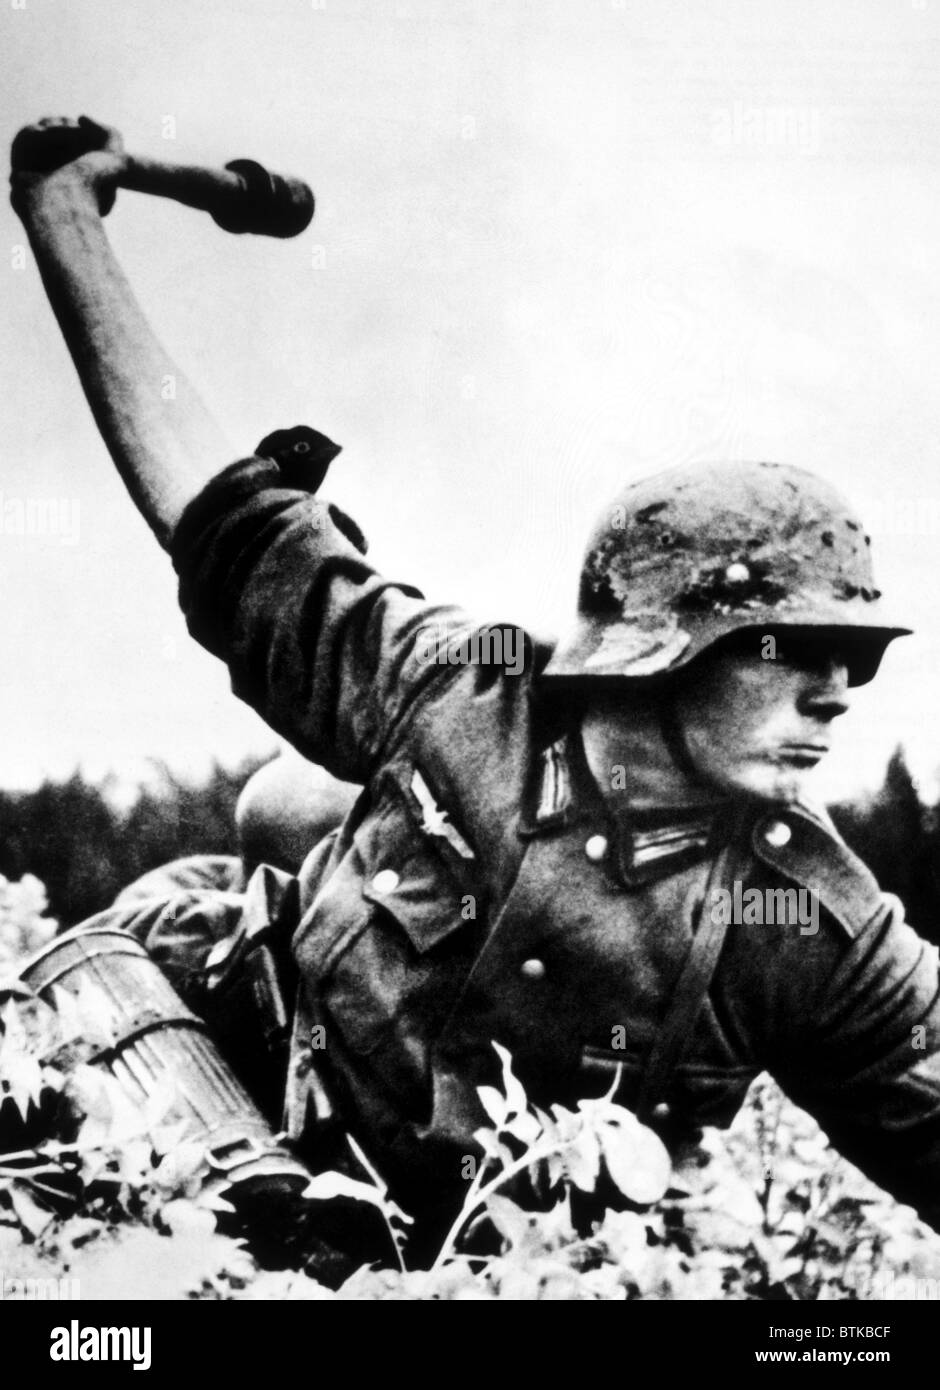 World War II, A German soldier about to threw a hand grenade in Poland, 1939 Stock Photo